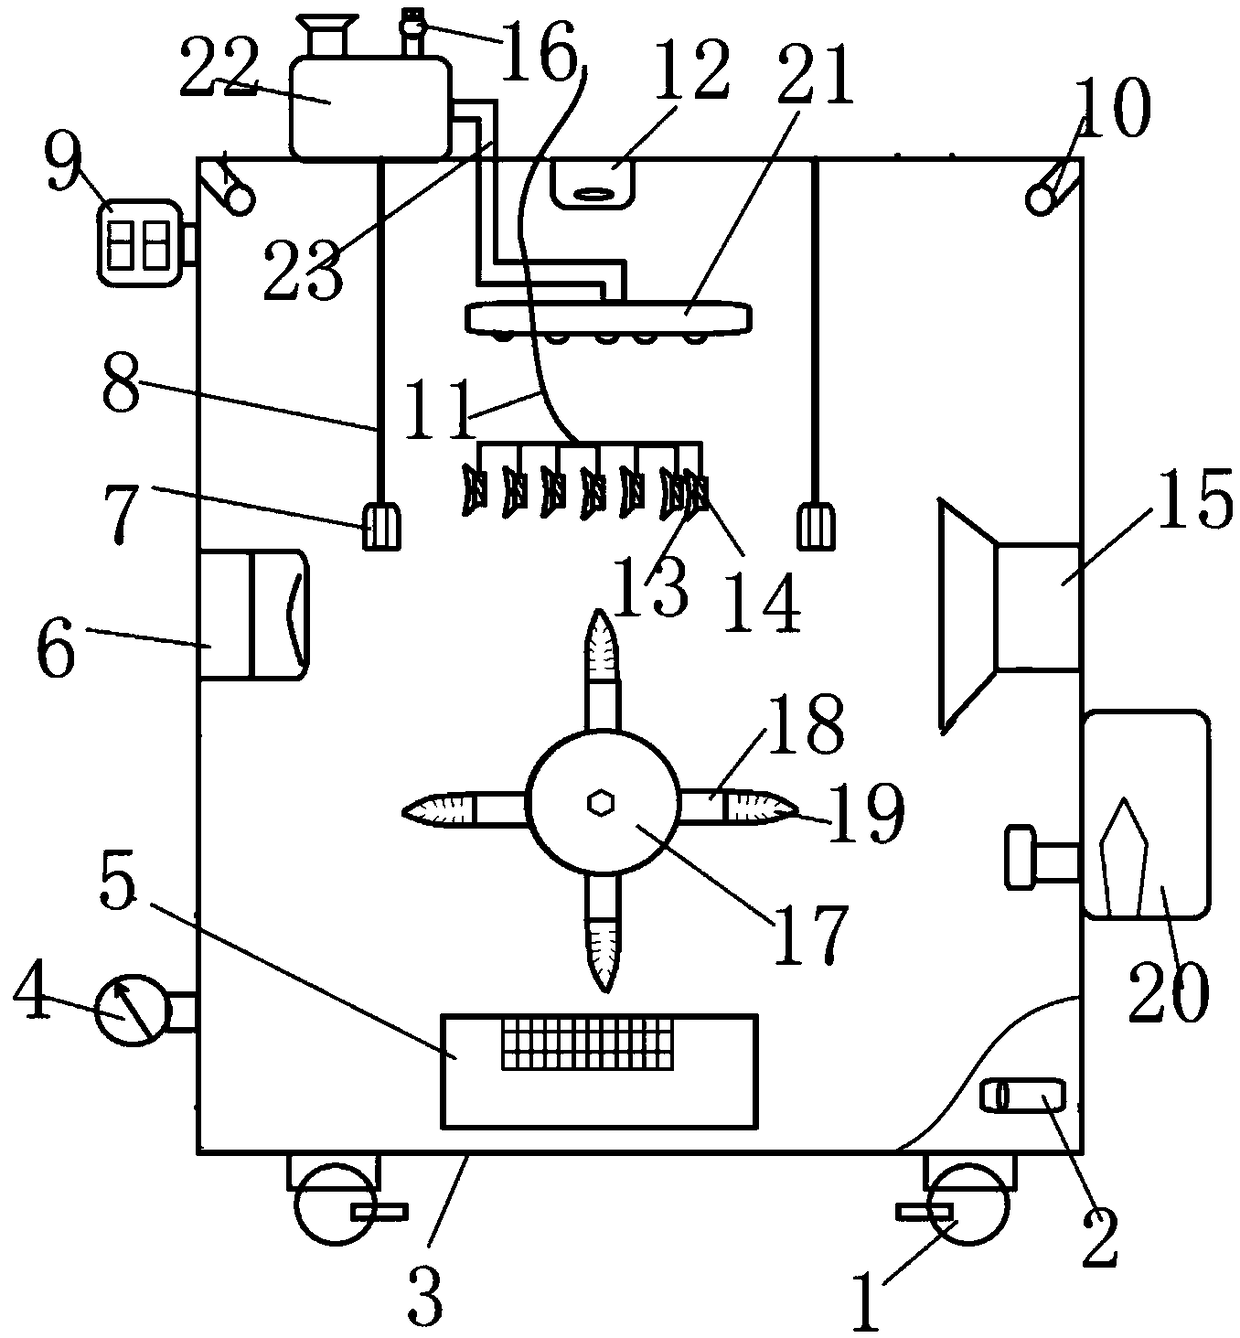 Safety mechanical fault diagnosis detection device